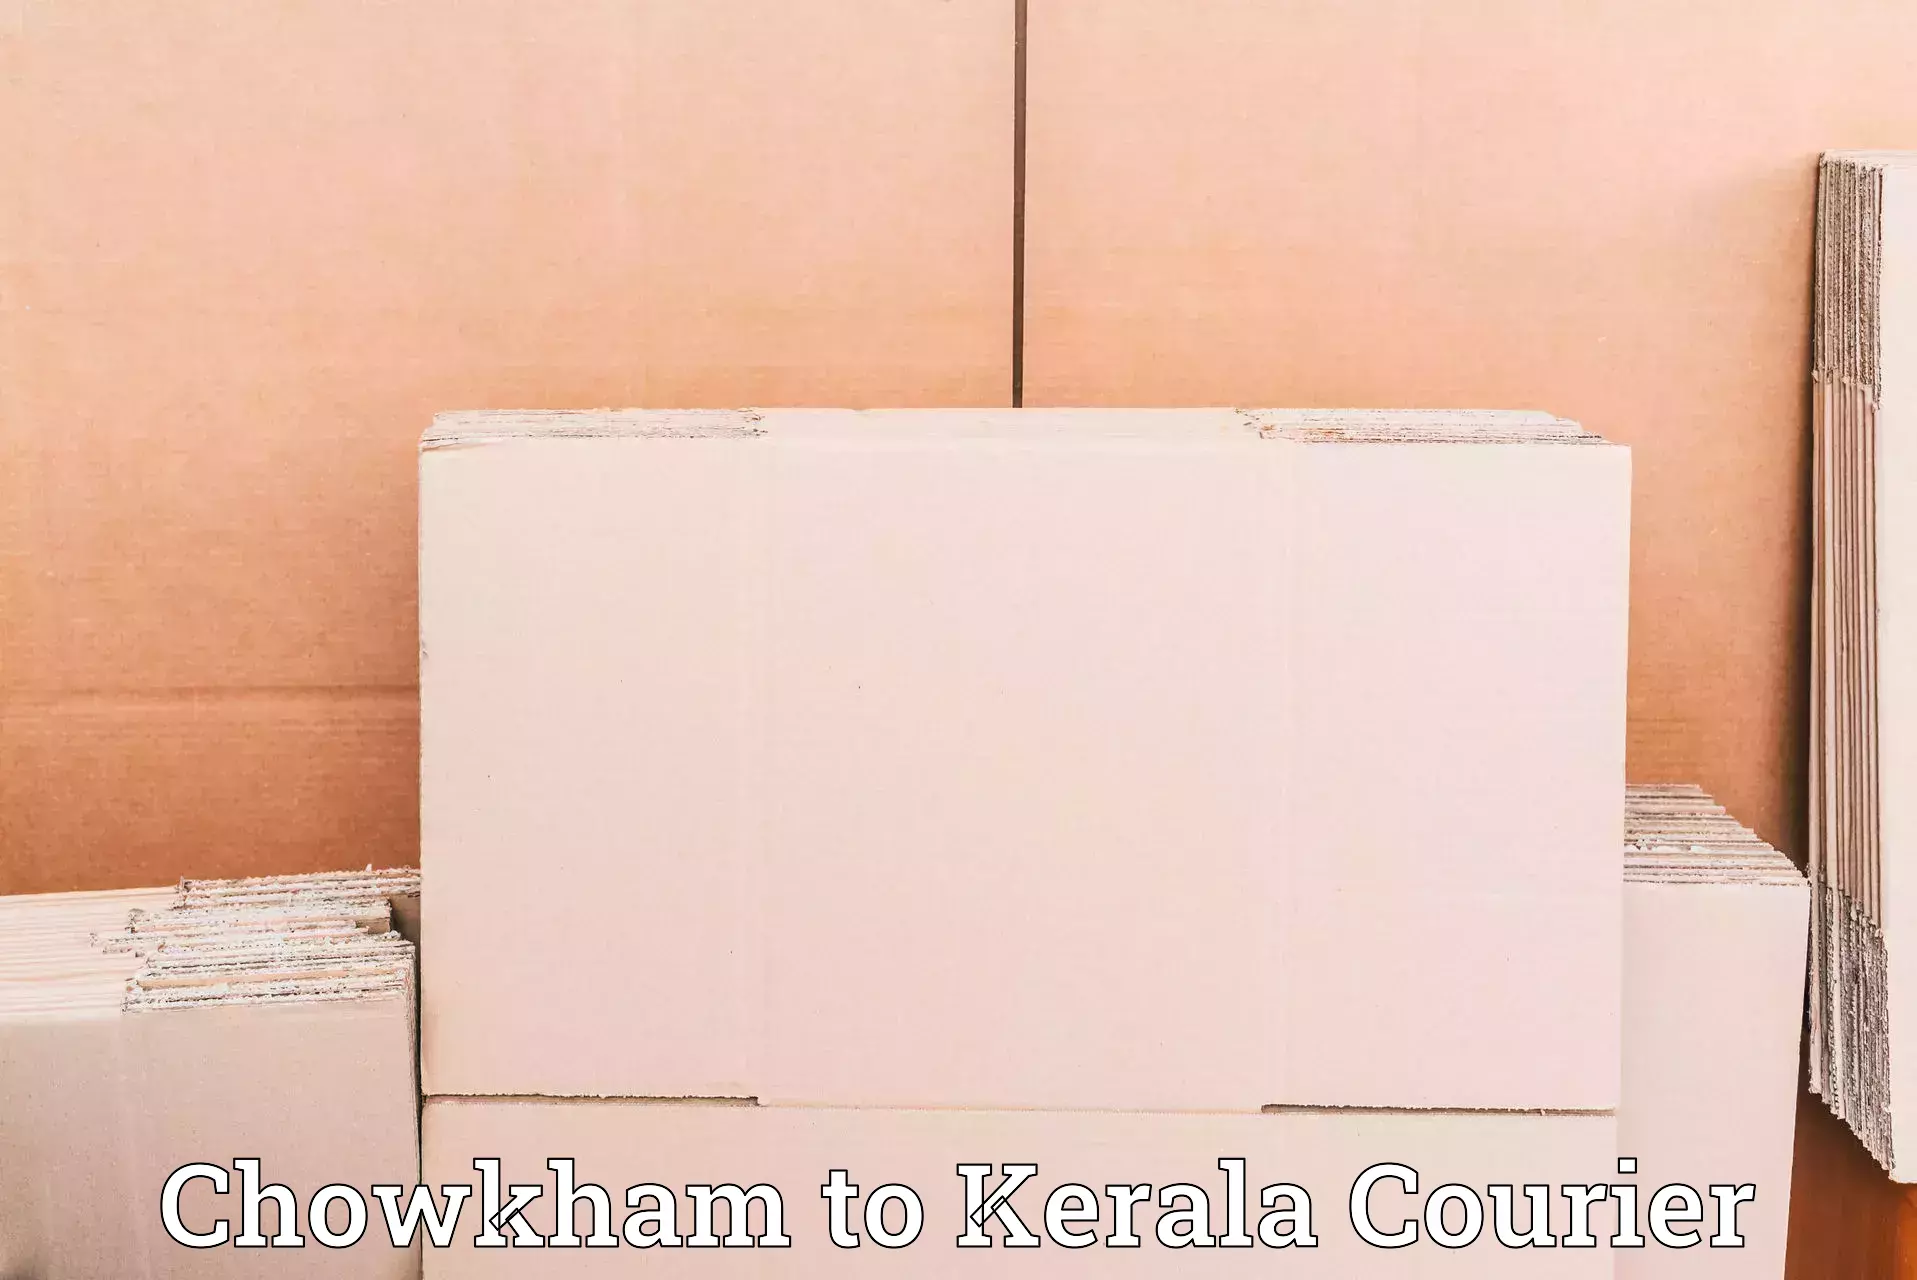 Next-day freight services Chowkham to Cochin University of Science and Technology